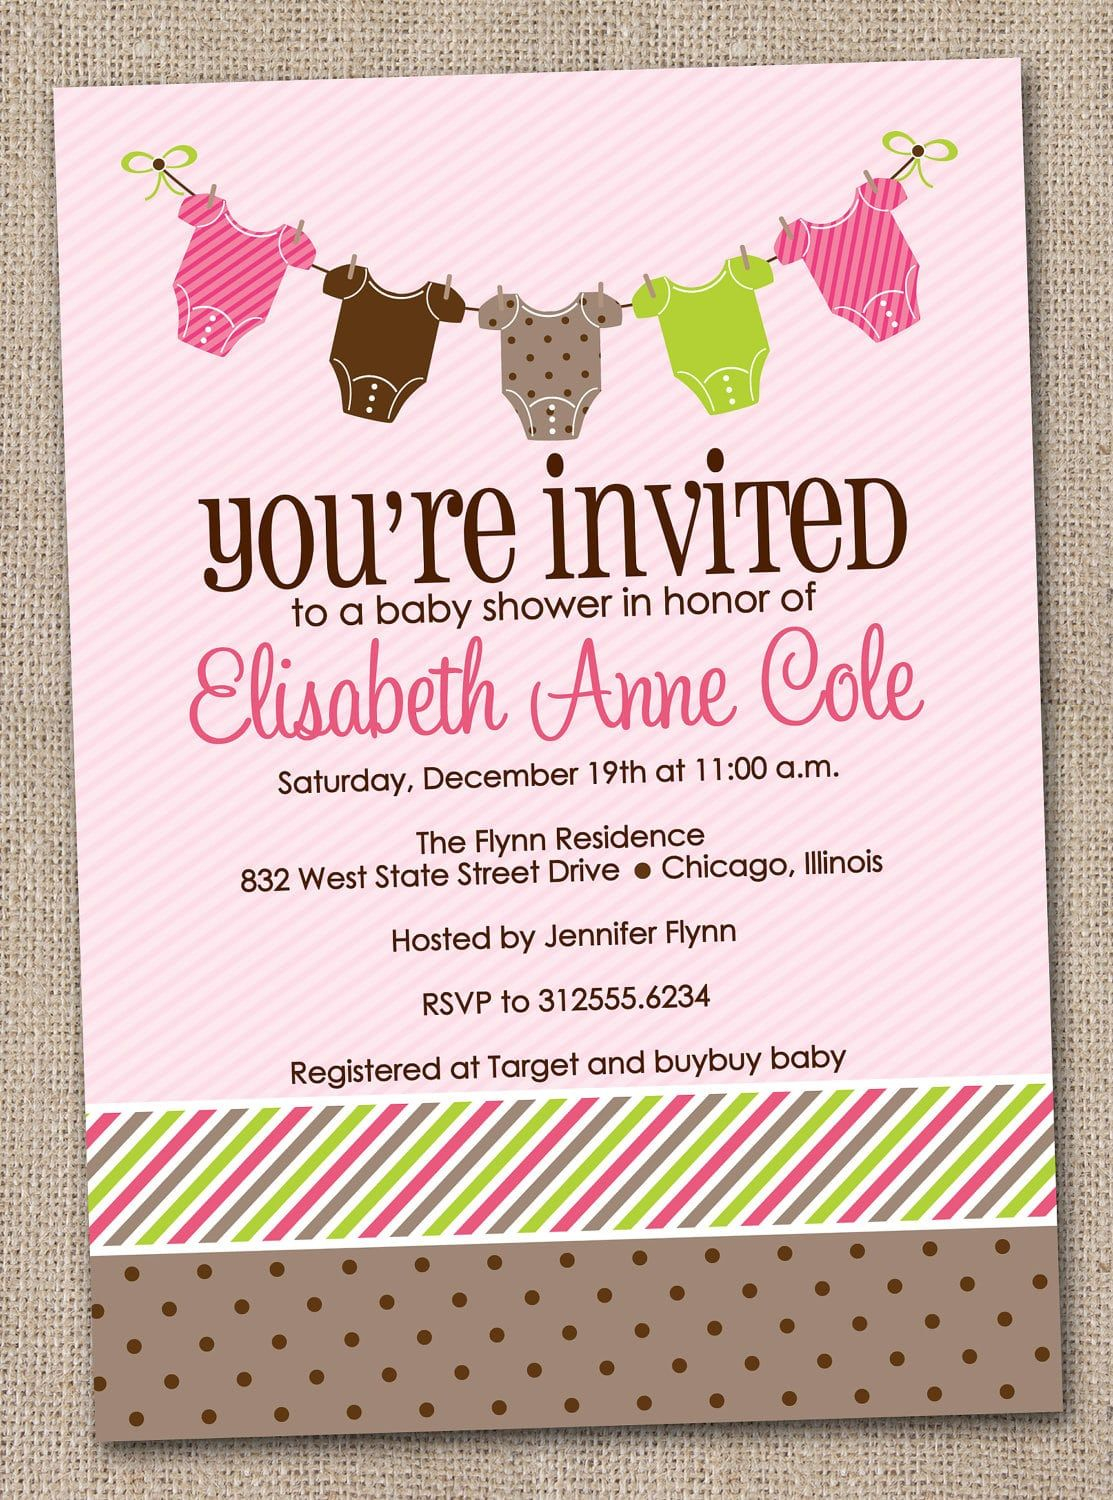 Ba Welcome Party Invitation Templates Sweet Party In 2019 Ba inside sizing 1113 X 1500